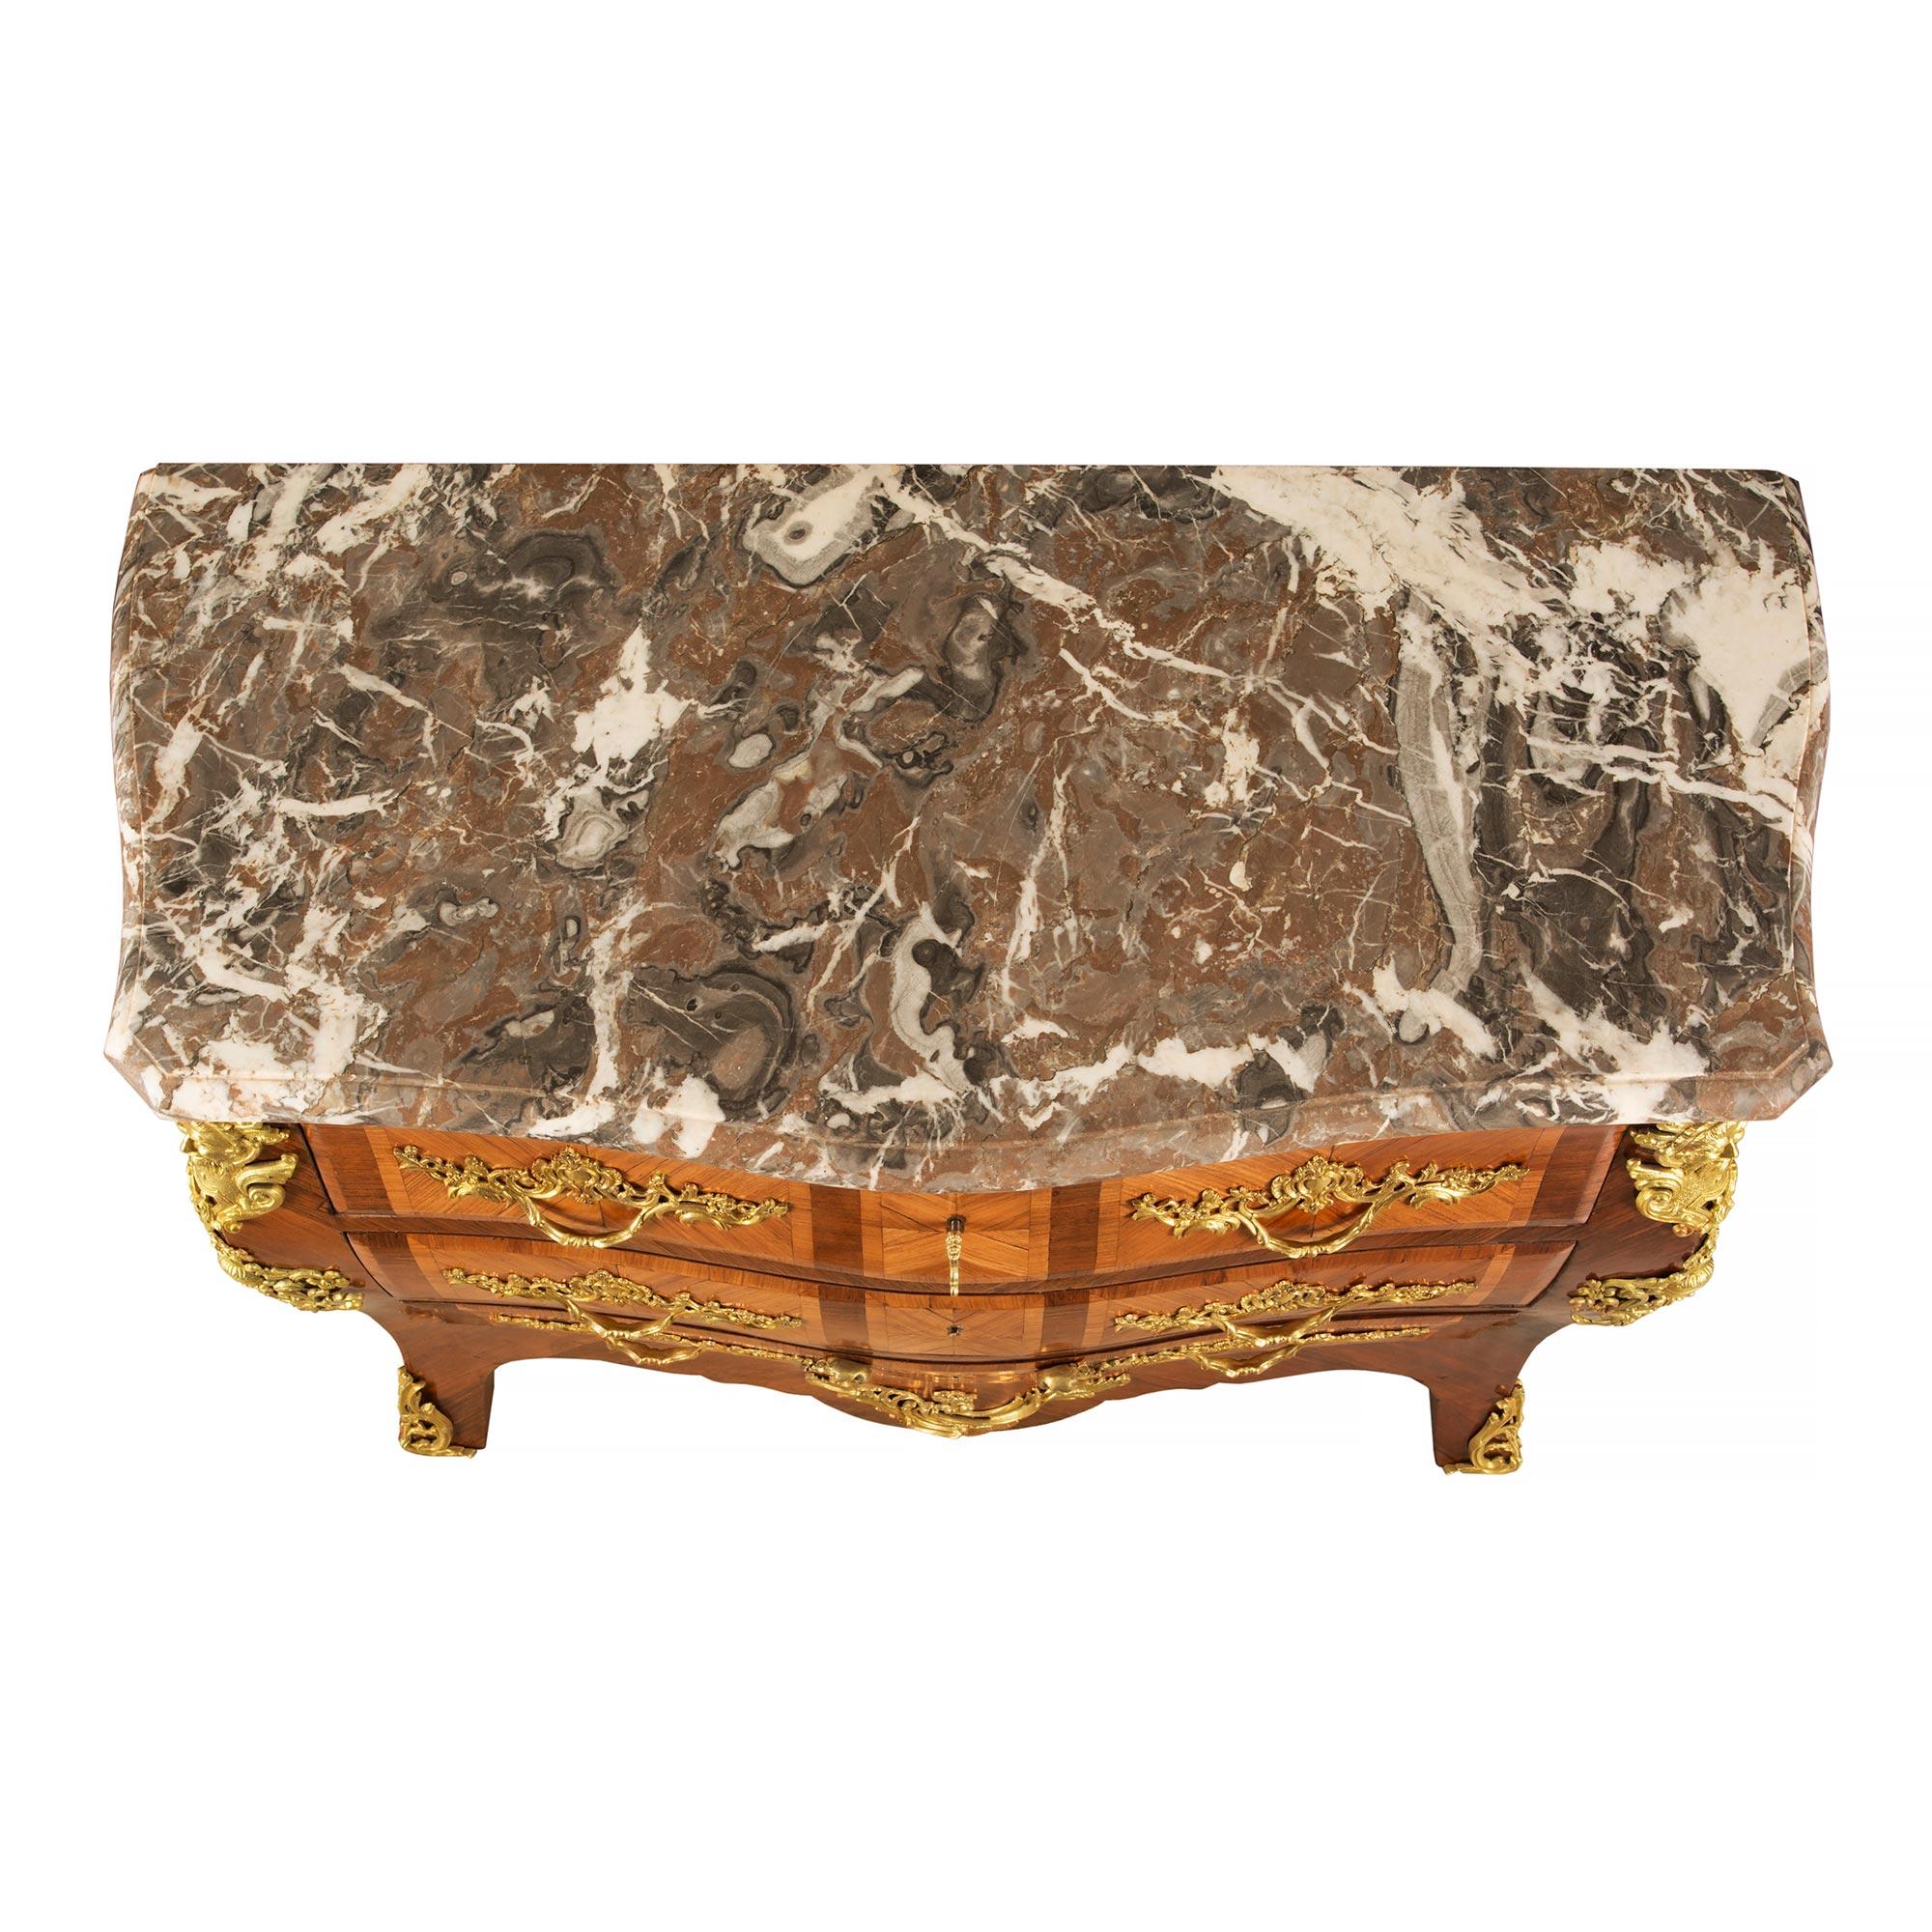 A stunning French 19th century Louis XV st. three drawer kingwood, tulipwood and ormolu commode. The bombe shaped commode is raised on short cabriole legs decorated by ormolu masculine masks above scrolled mounts. The scrolled shaped frieze is